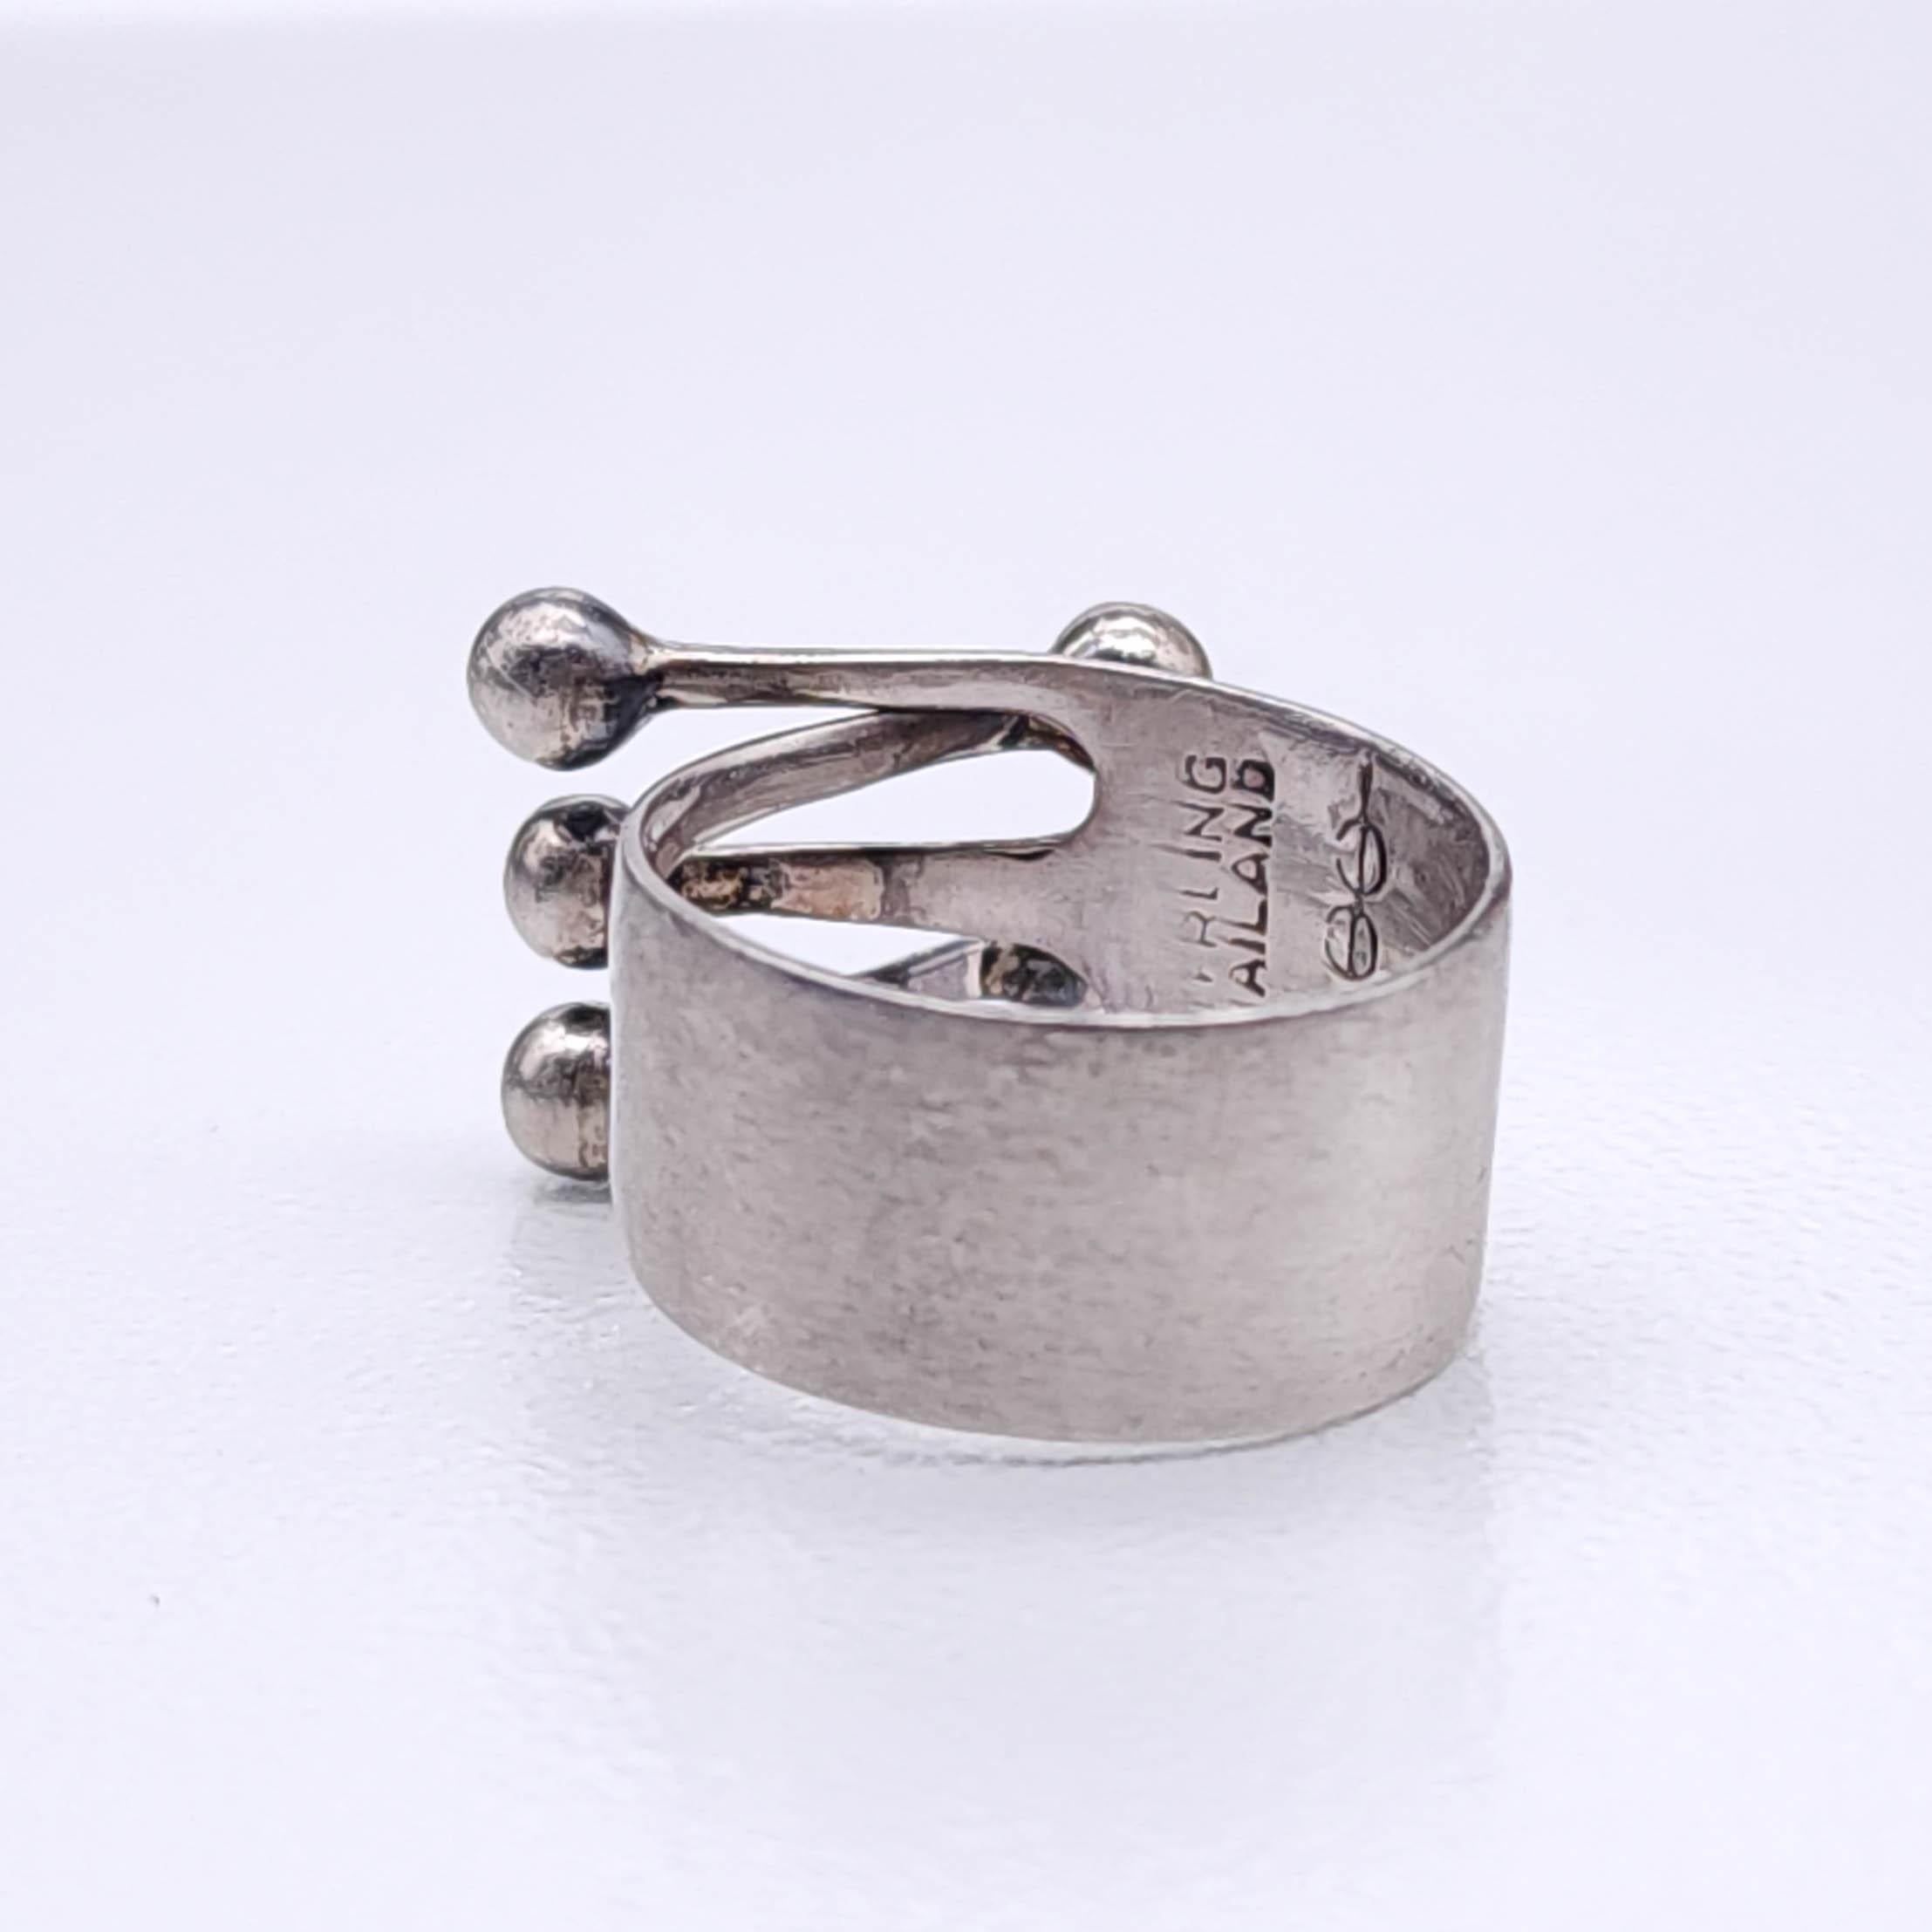 8.75 Vintage Sterling Silver Open Interlocking Statement Ring Band, 20th Century In Excellent Condition For Sale In Milford, DE